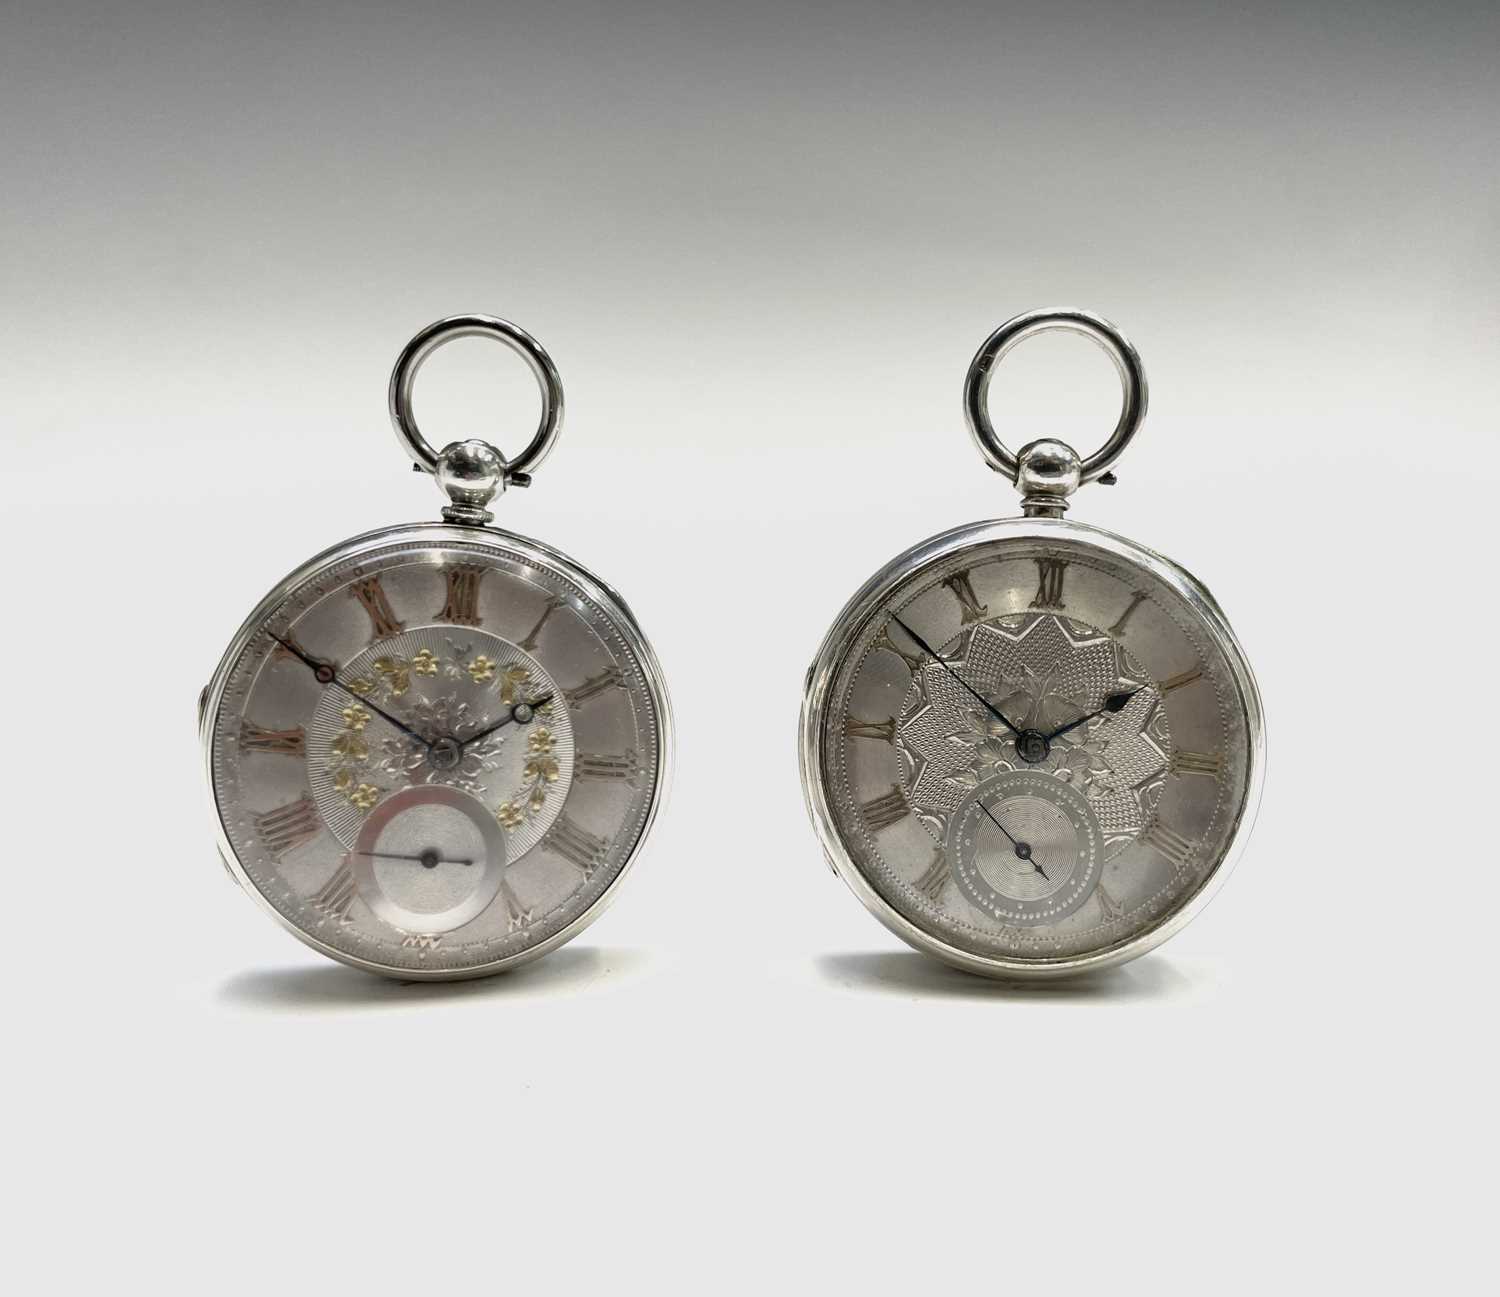 Lot 136 - An English key-wind silver pocket watch with...